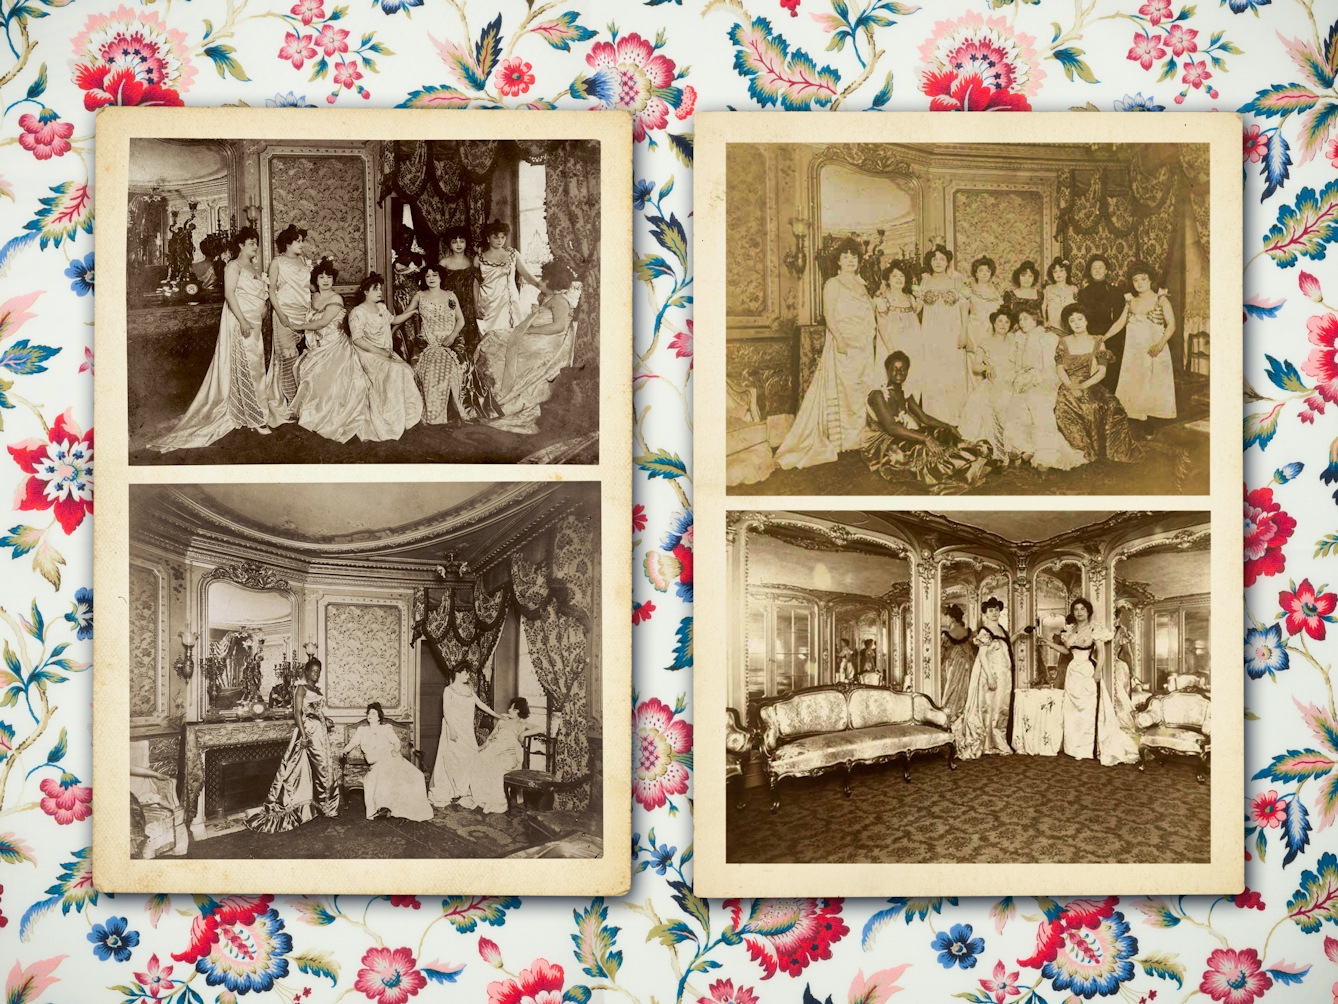 Digital composite image showing an early 20th century Parisienne colourful floral fabric background. Resting on top of the background are four 20th century sepia toned photographs showing groups of women posing within the setting of the lavishly decorated interiors of the 'maisons de tolérance' in Paris. They are all dressed in long flowing dresses and are looking to camera.